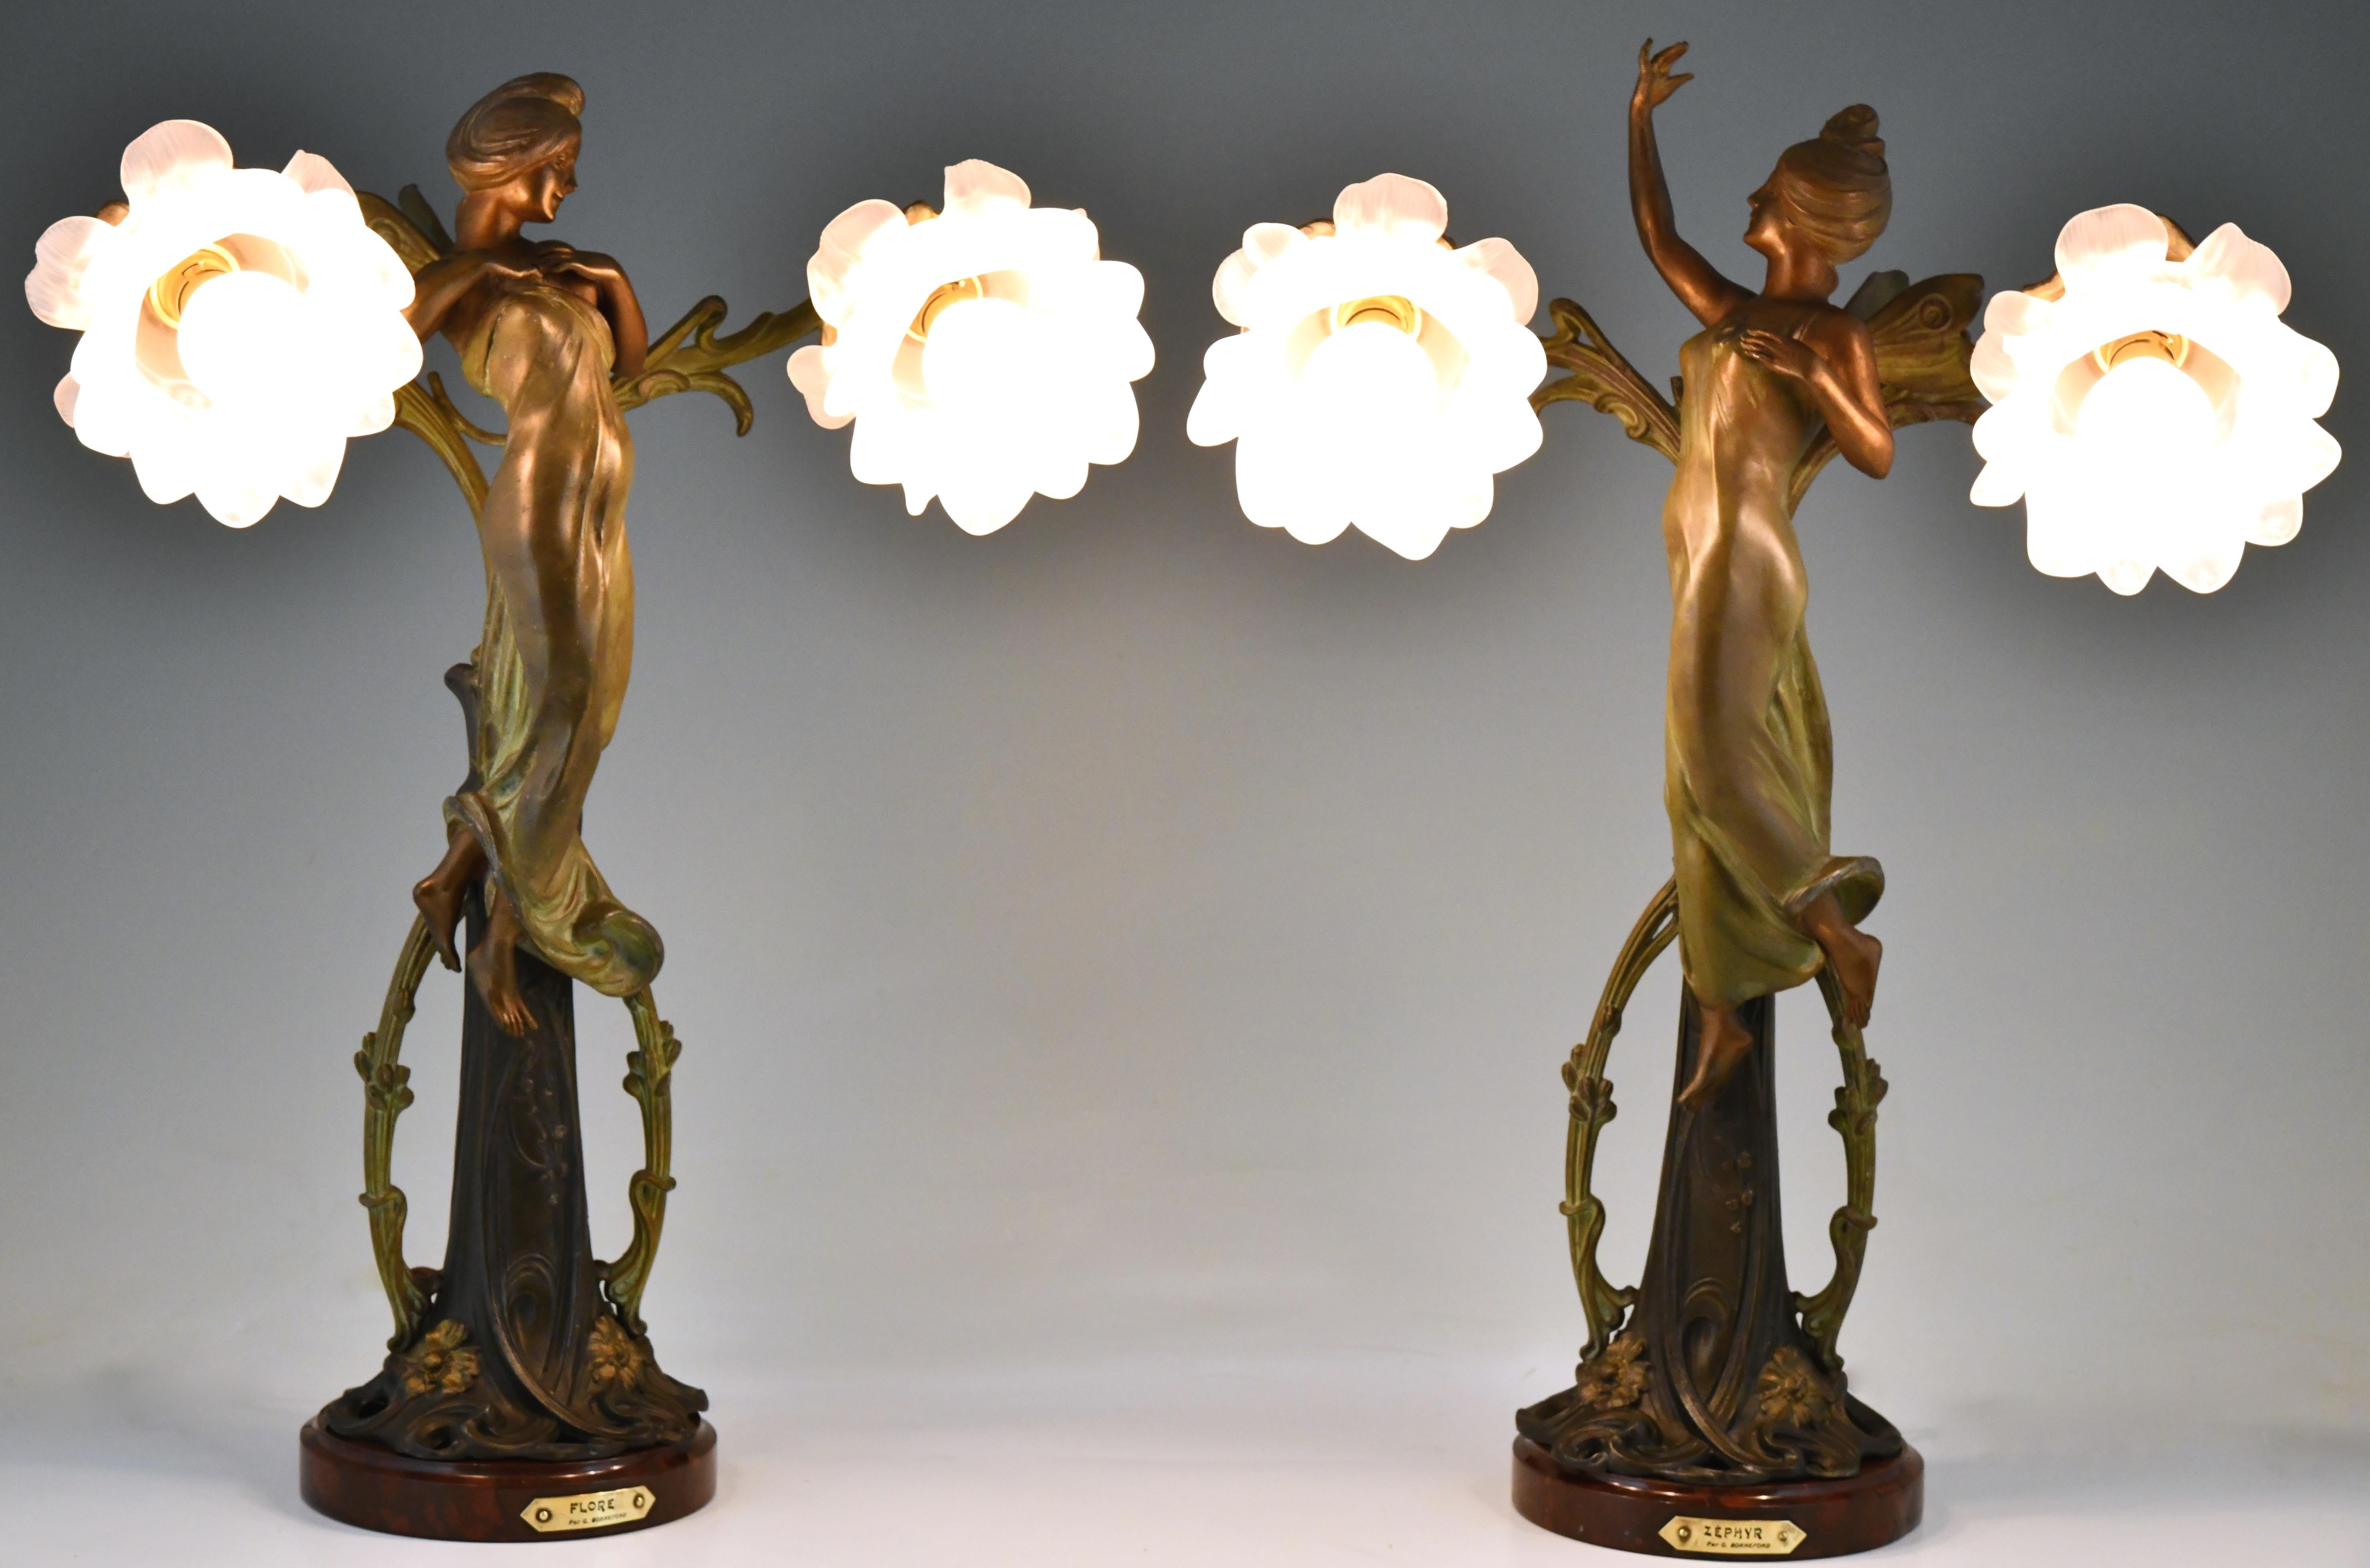 Pair of Art Nouveau lamps ladies and flowers, Zephyr & Flore signed by Claude Bonnefond.
Patinated metal, glass and Belgian red marble.
France circa 1900.
Information of the artist:
Etains 1900, Philippe Dahhan, les editions de l'amateur.